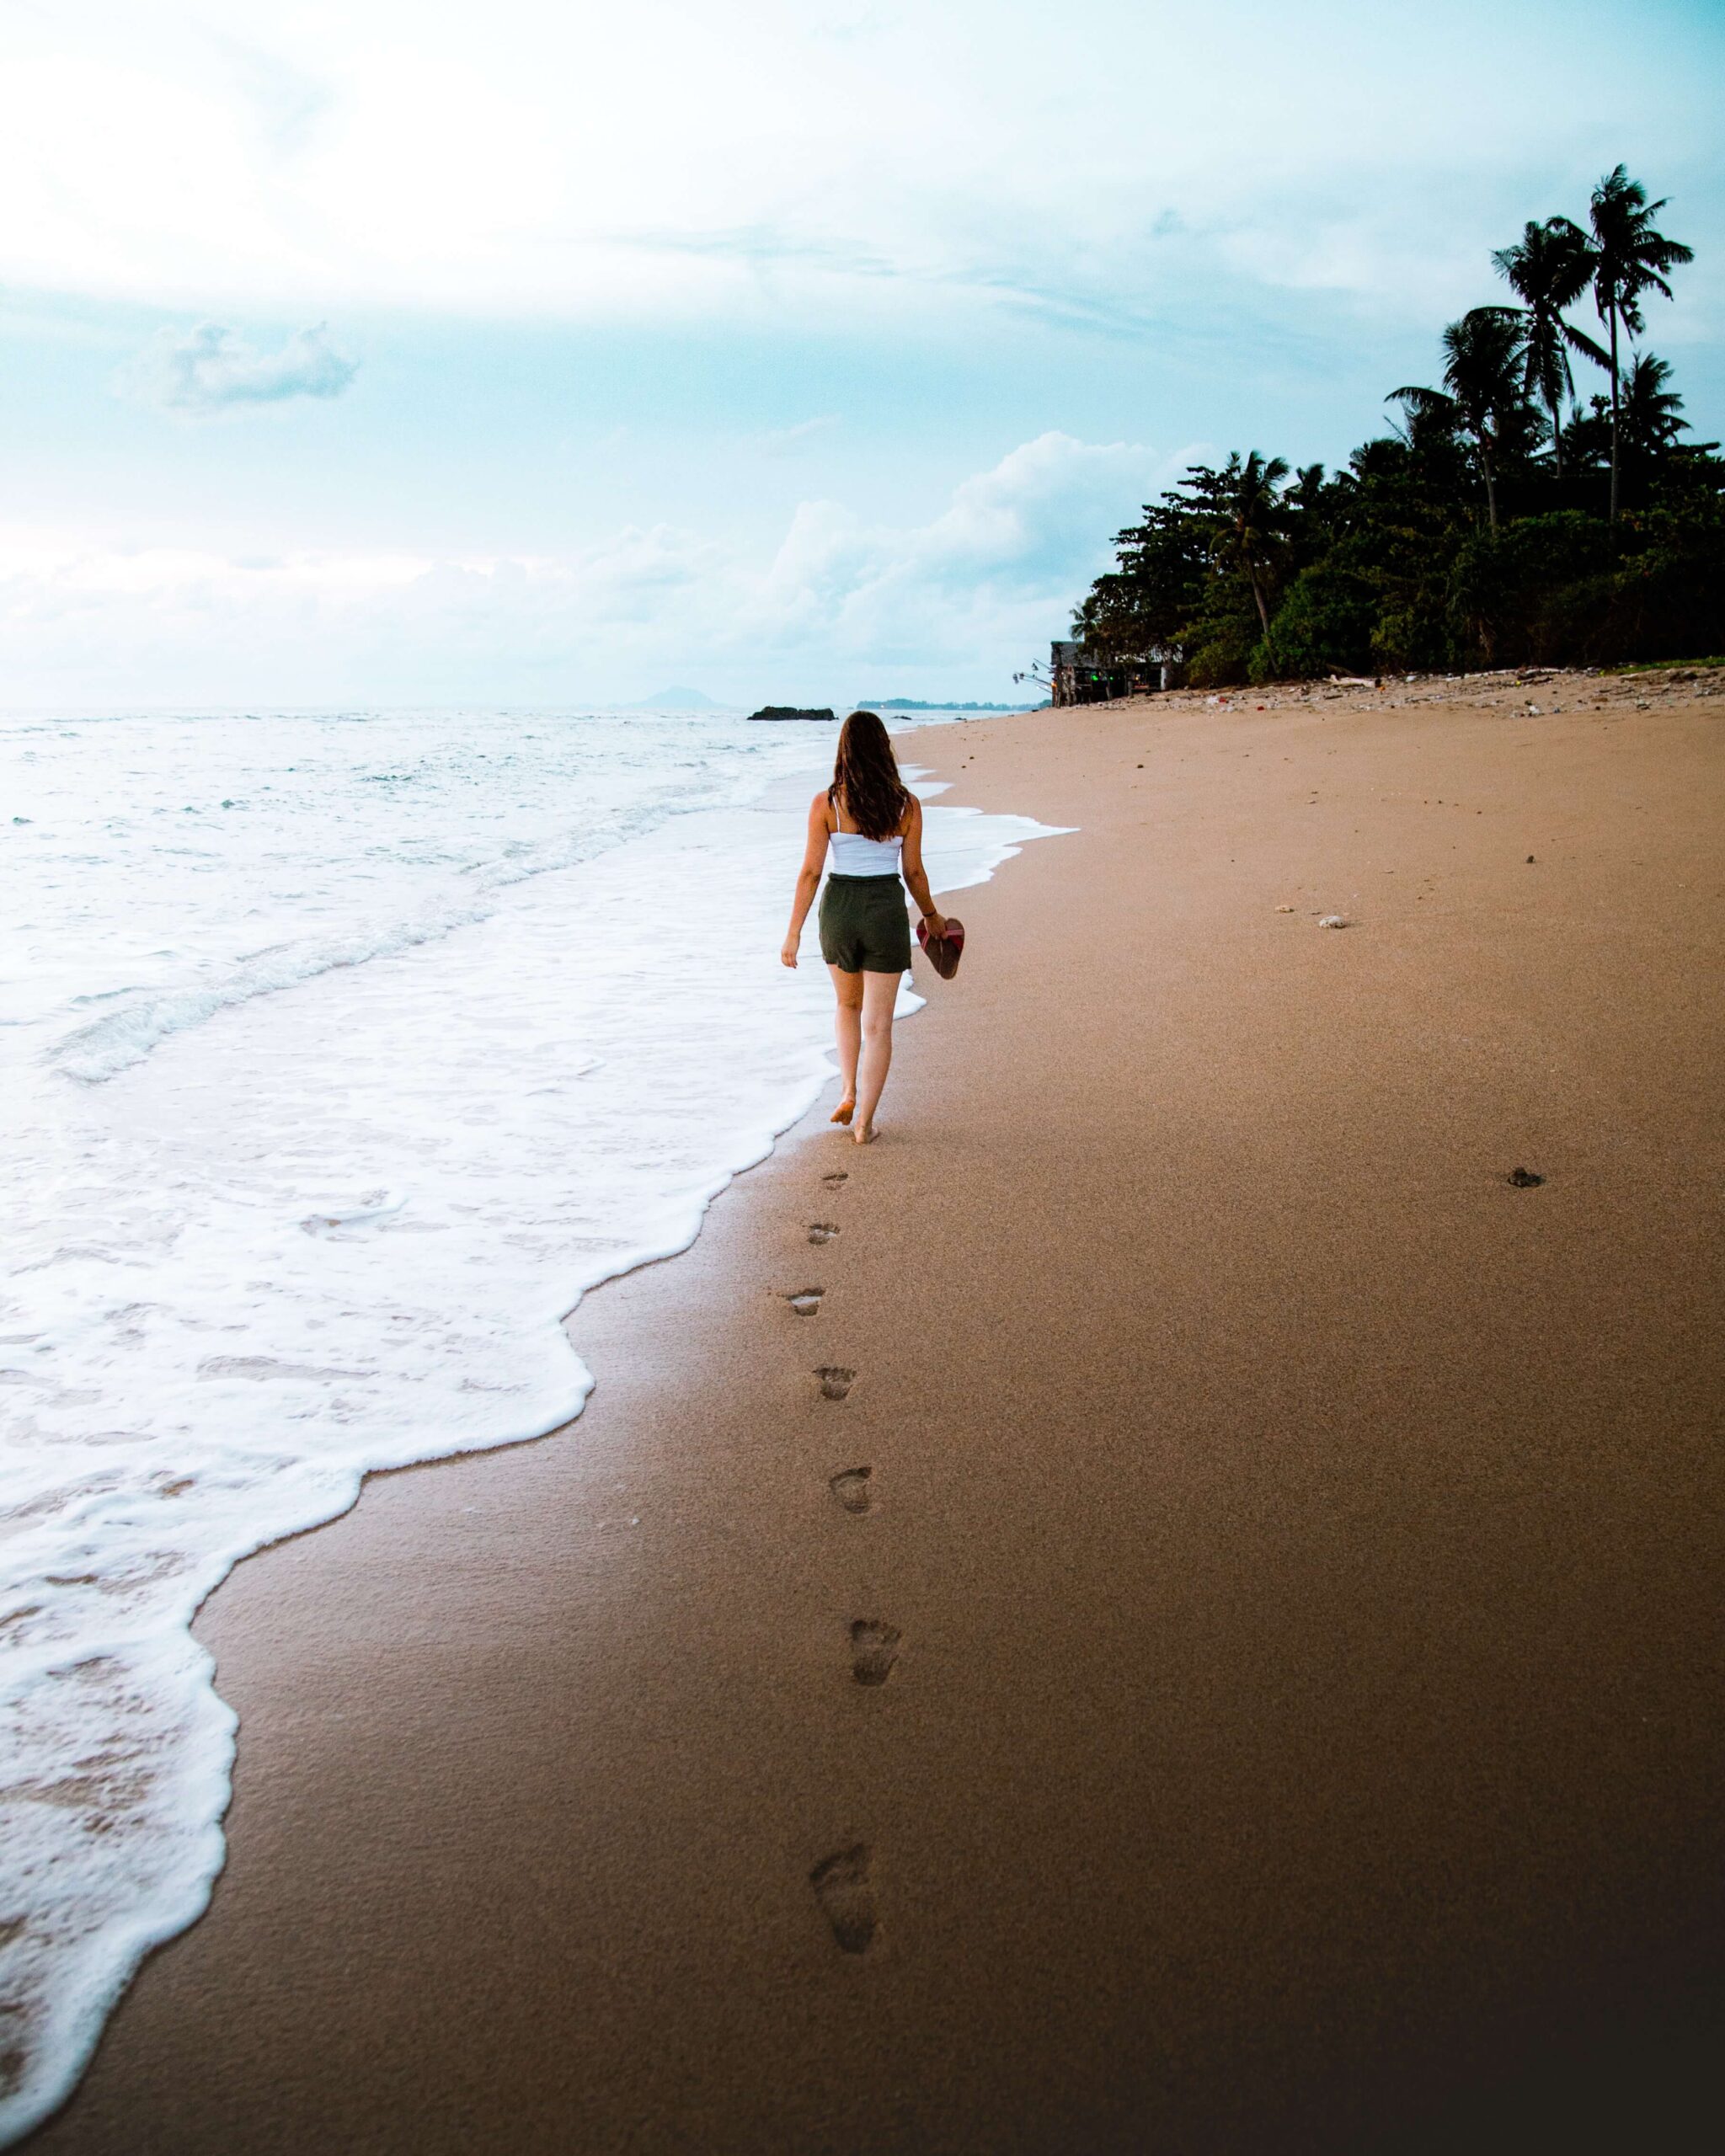 Image of a woman walking down the beach holding her shoes with her footprints in the sand. With the help of a skilled trauma therapist, you can begin managing your PTSD in healthy ways in PTSD treatment in Saint Petersburg, FL.